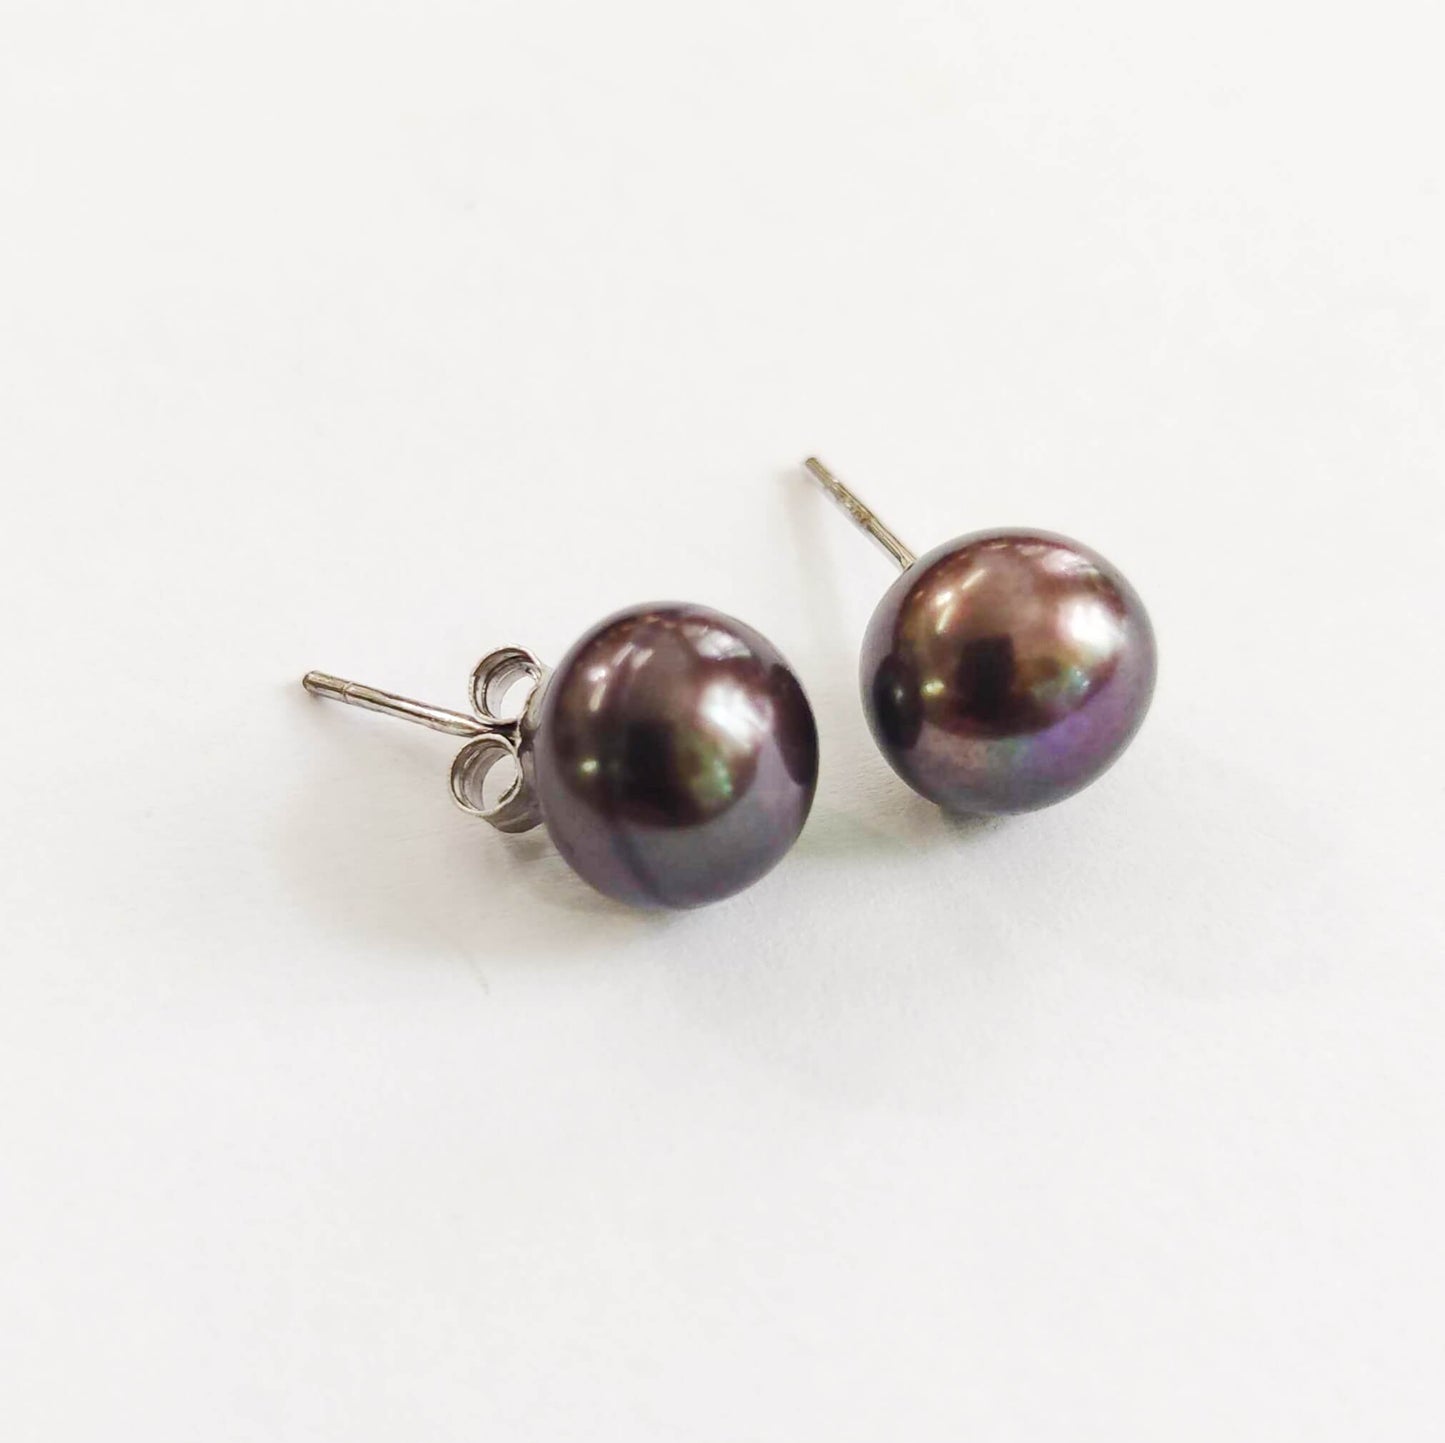 Silver Earrings with Black Freshwater Pearls